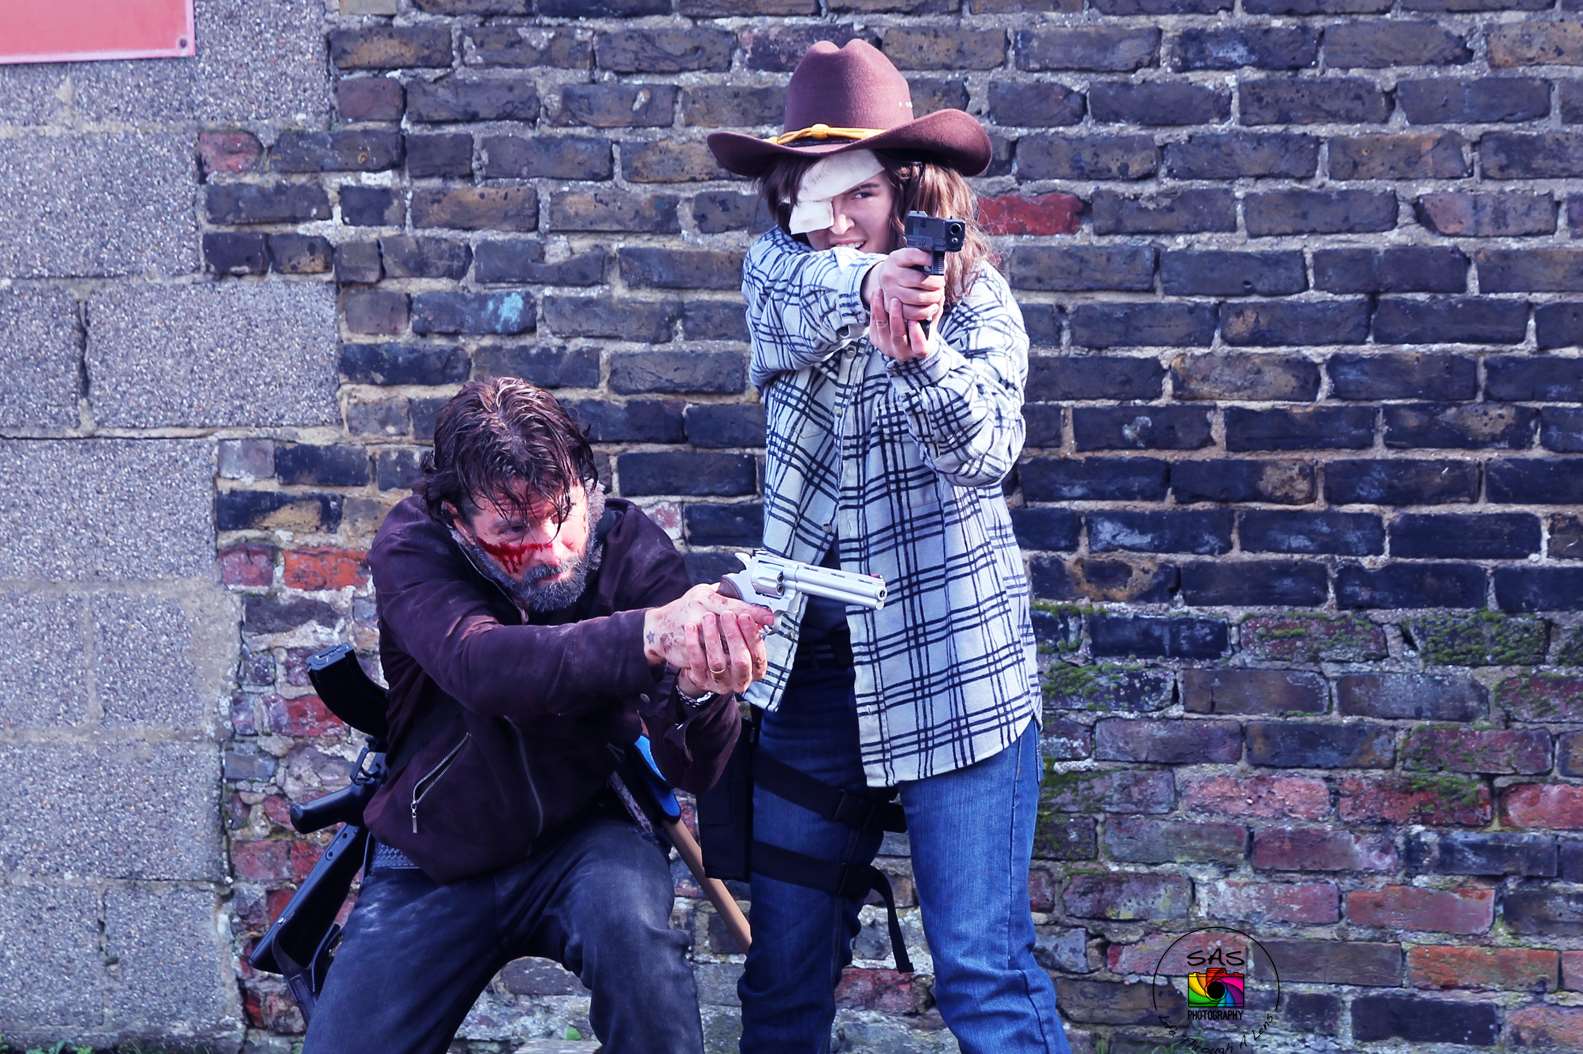 Fabionei Bakhuizen, left, and Reyes Delgado, right, dressed up as Rick and Carl Grimes. Picture: Stephanie Parton (SAS Photography) and Gino Cinganelli